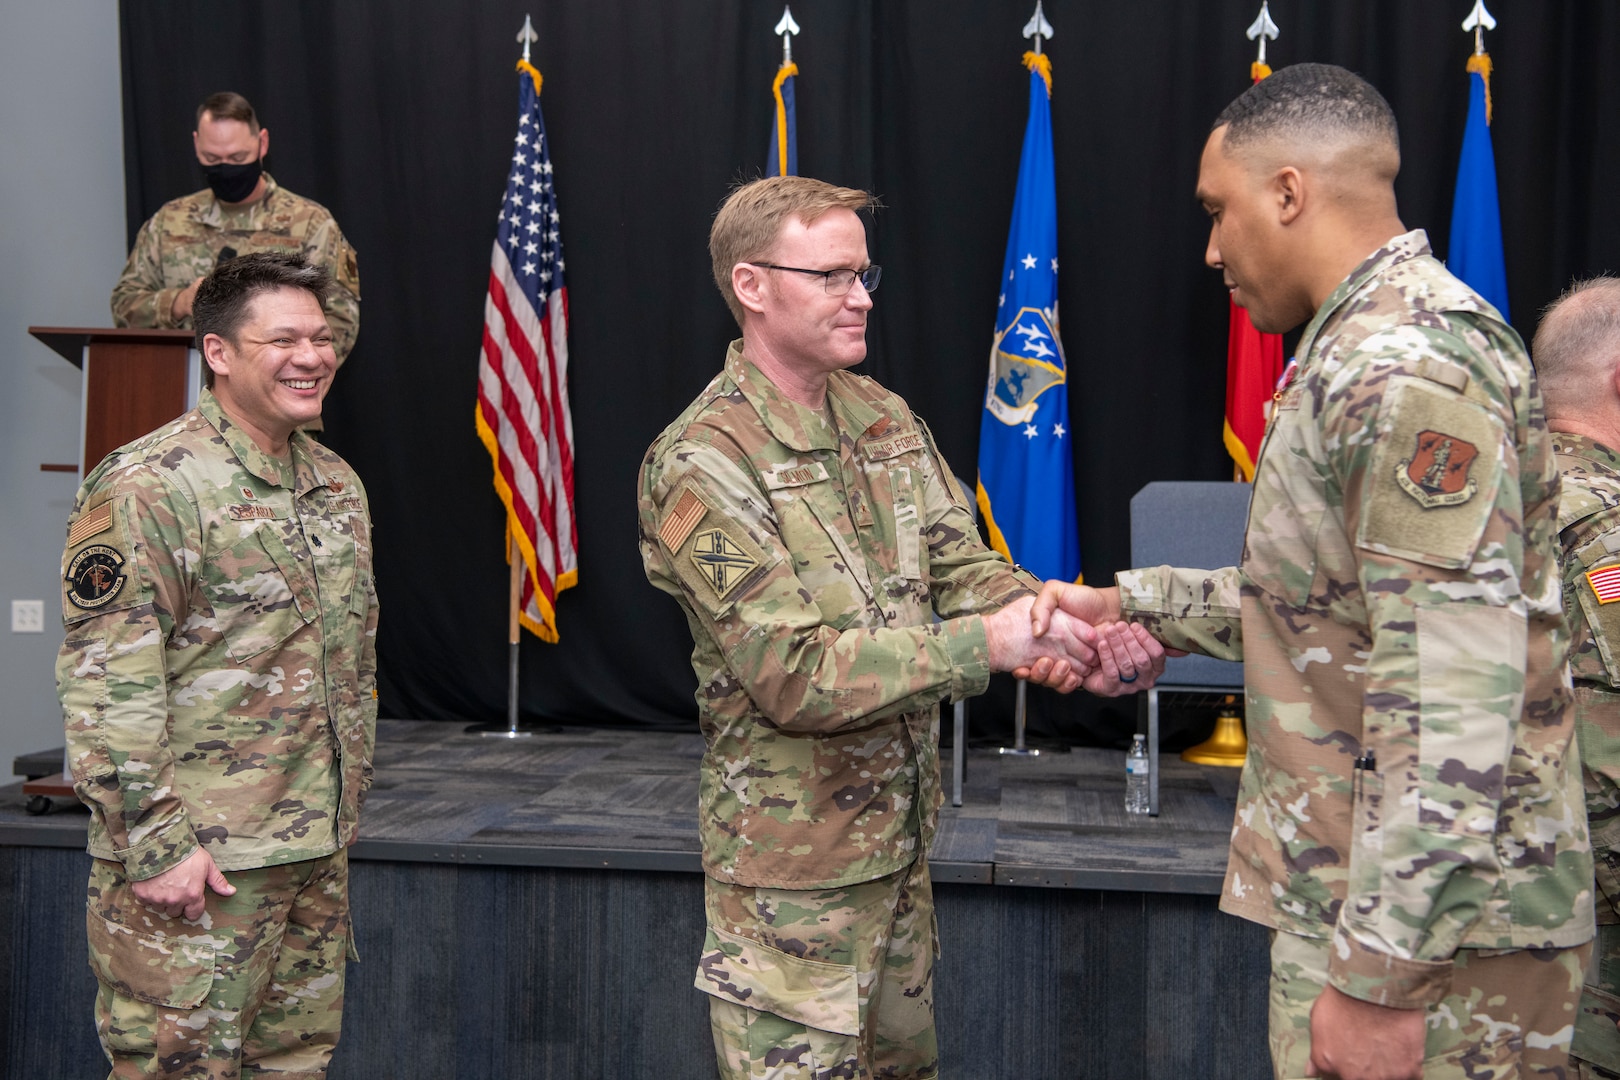 Brig. Gen. Bryan E. Salmon, the Assistant Adjutant General for Air National Guard Strategic Initiatives, shakes an Airman's hand at an end of mobilization ceremony Feb. 25, 2022, in Hampton, Virginia.